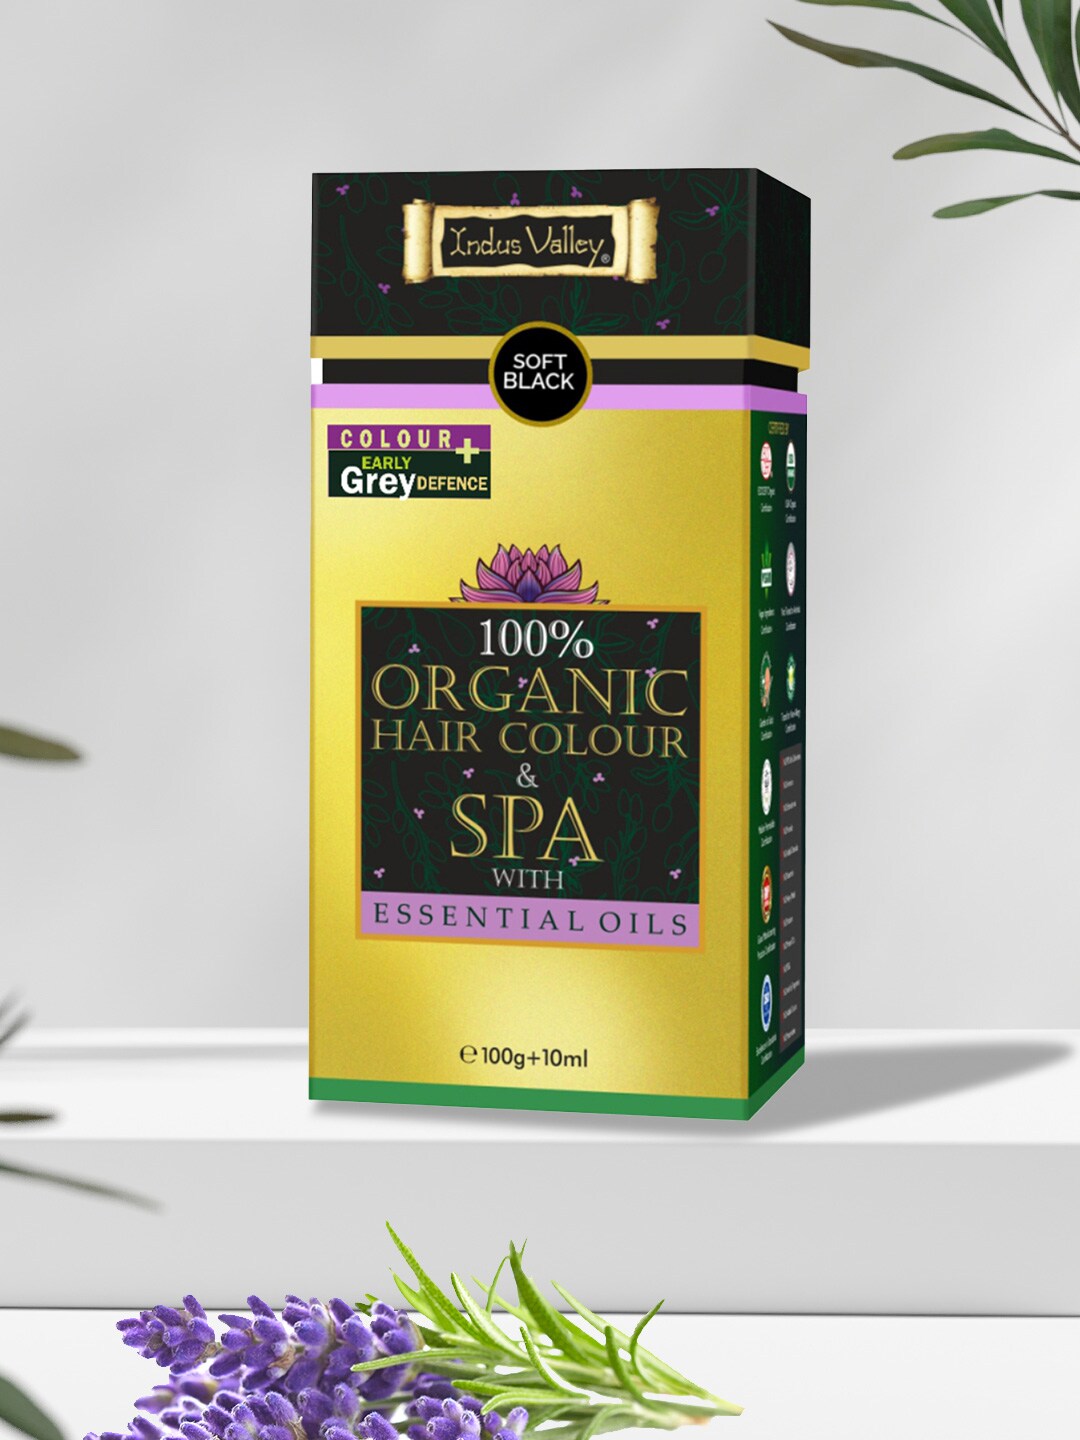 Indus Valley 100% Oragnic Hair Colour & Spa with Essential Oil- Soft Black-100g Price in India